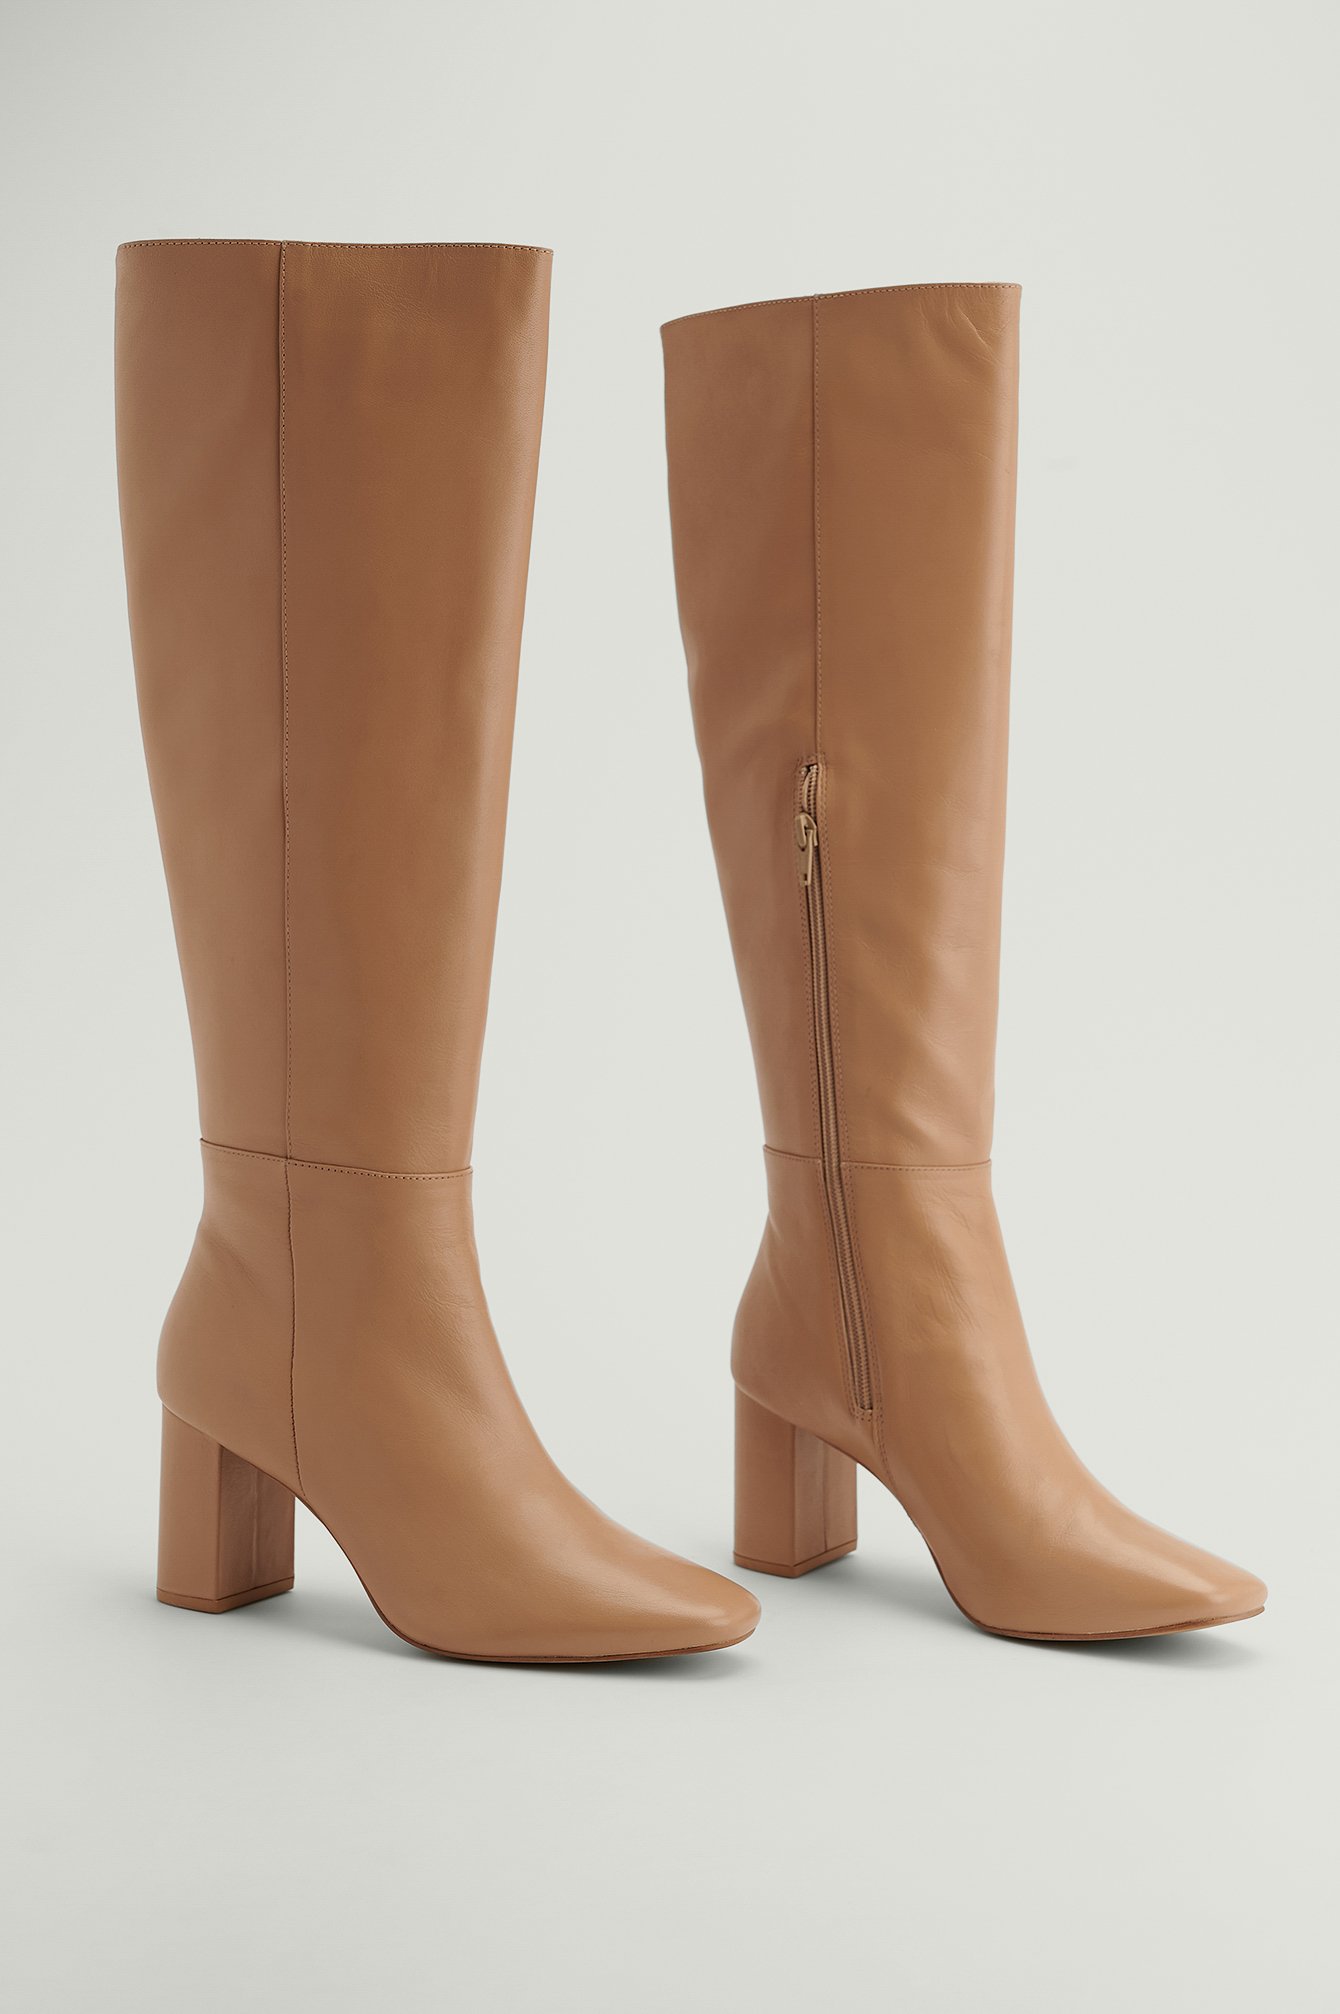 Beige Leather Knee High Boots